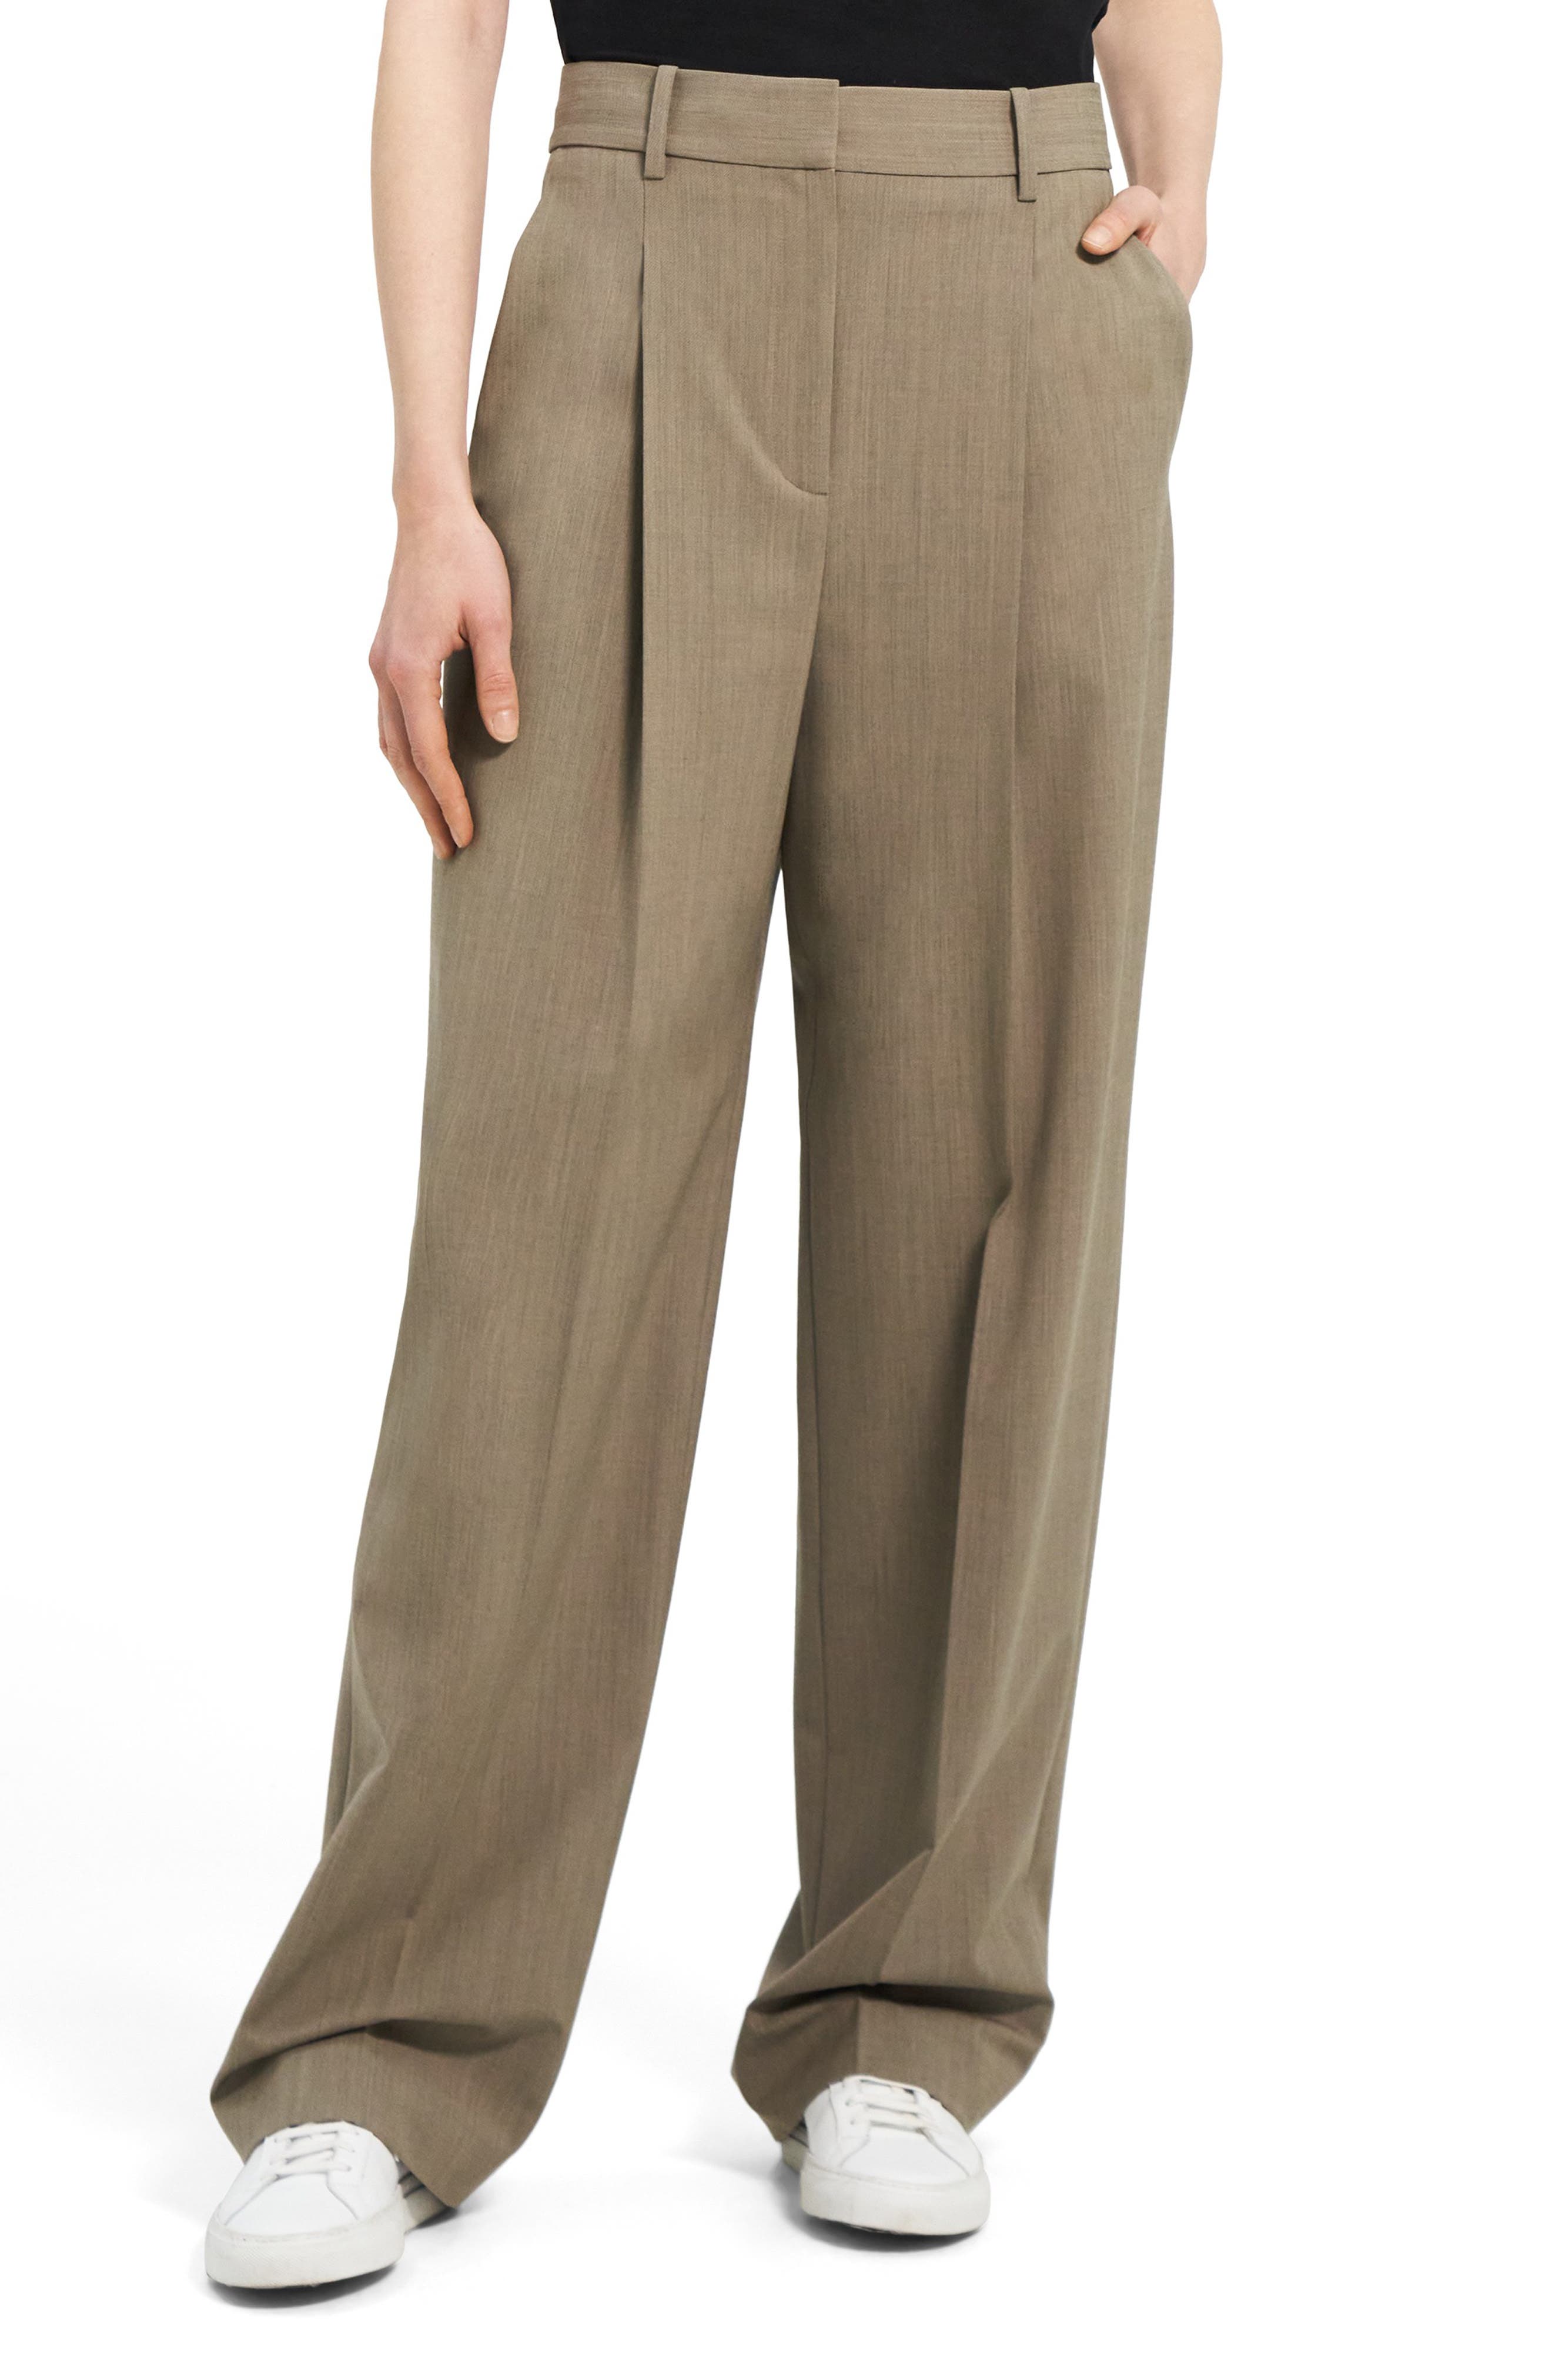 Slacks and Chinos Straight-leg trousers Womens Clothing Trousers Acne Studios Wool Tailored Trousers in Black 